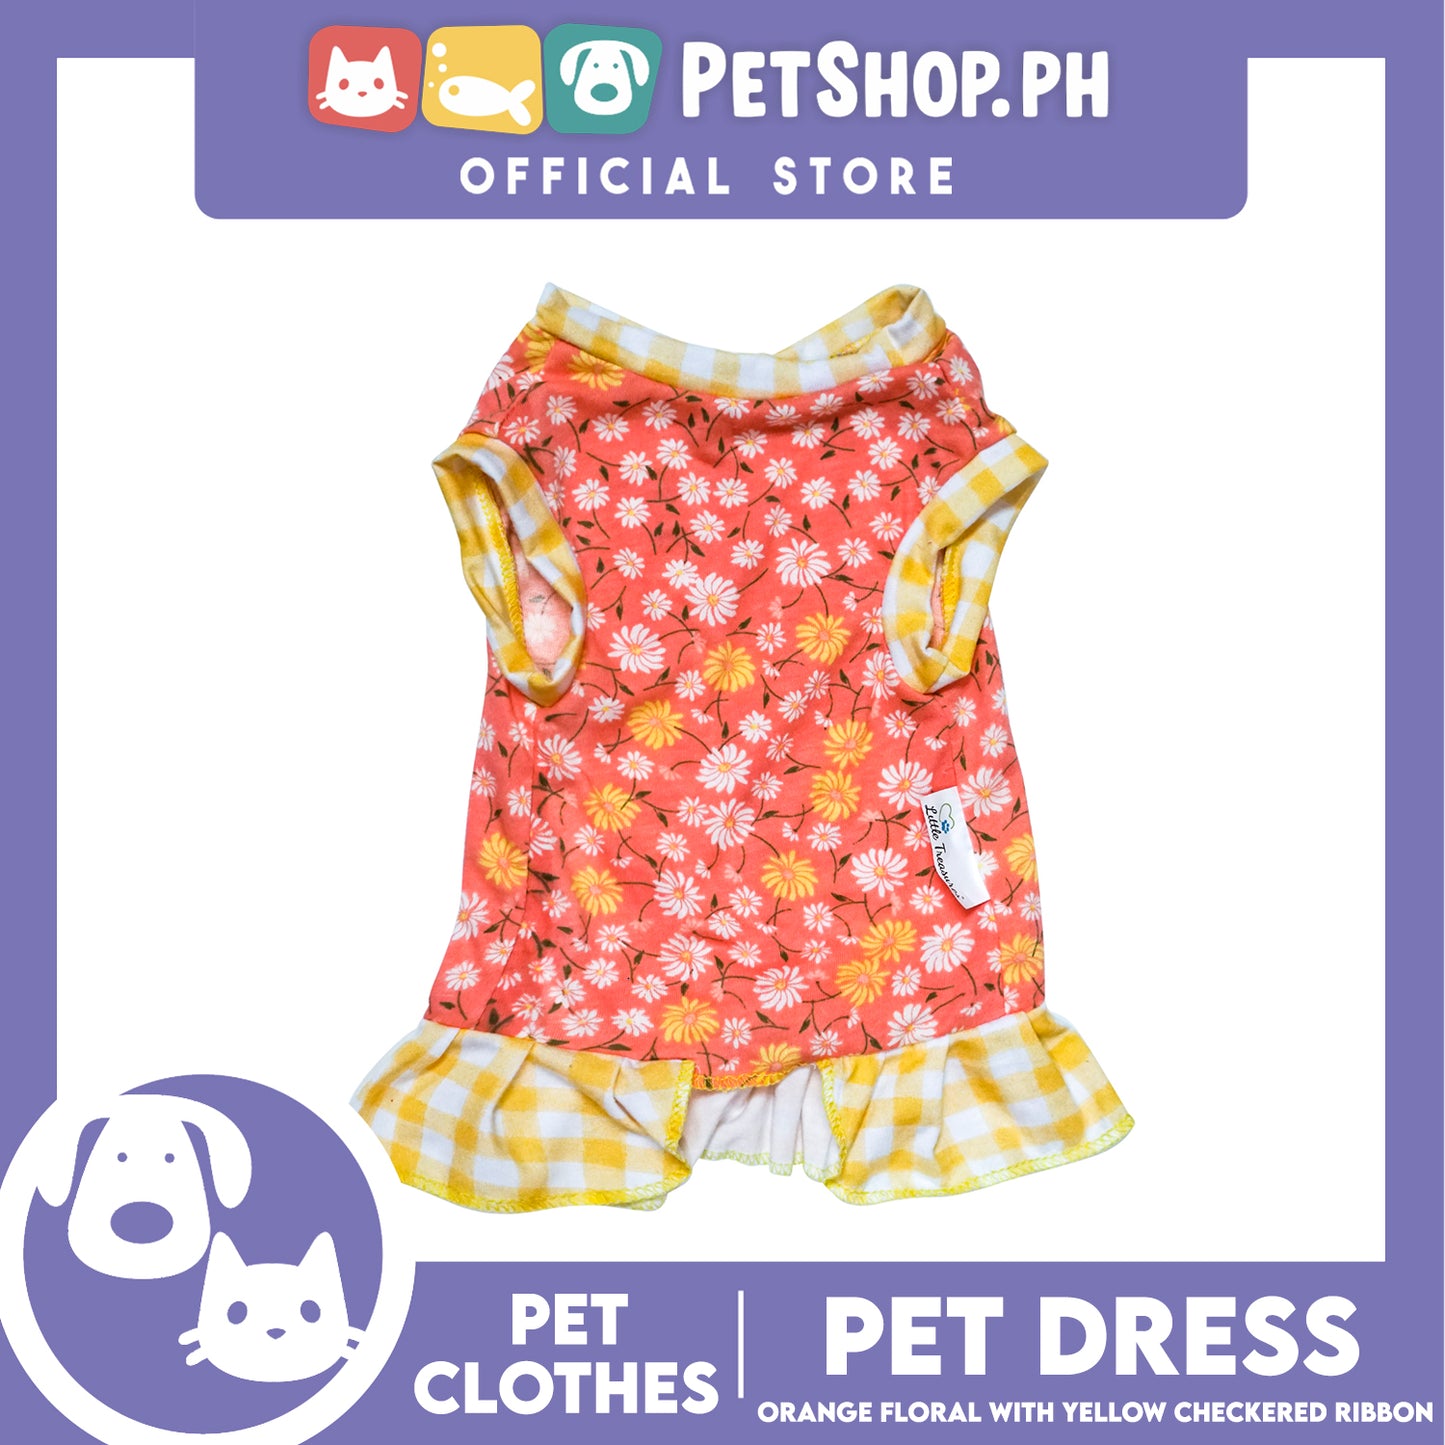 Pet Dress Orange Floral Yellow Checkered with Ribbon (Small) Pet Dress Clothes Perfect for Dogs